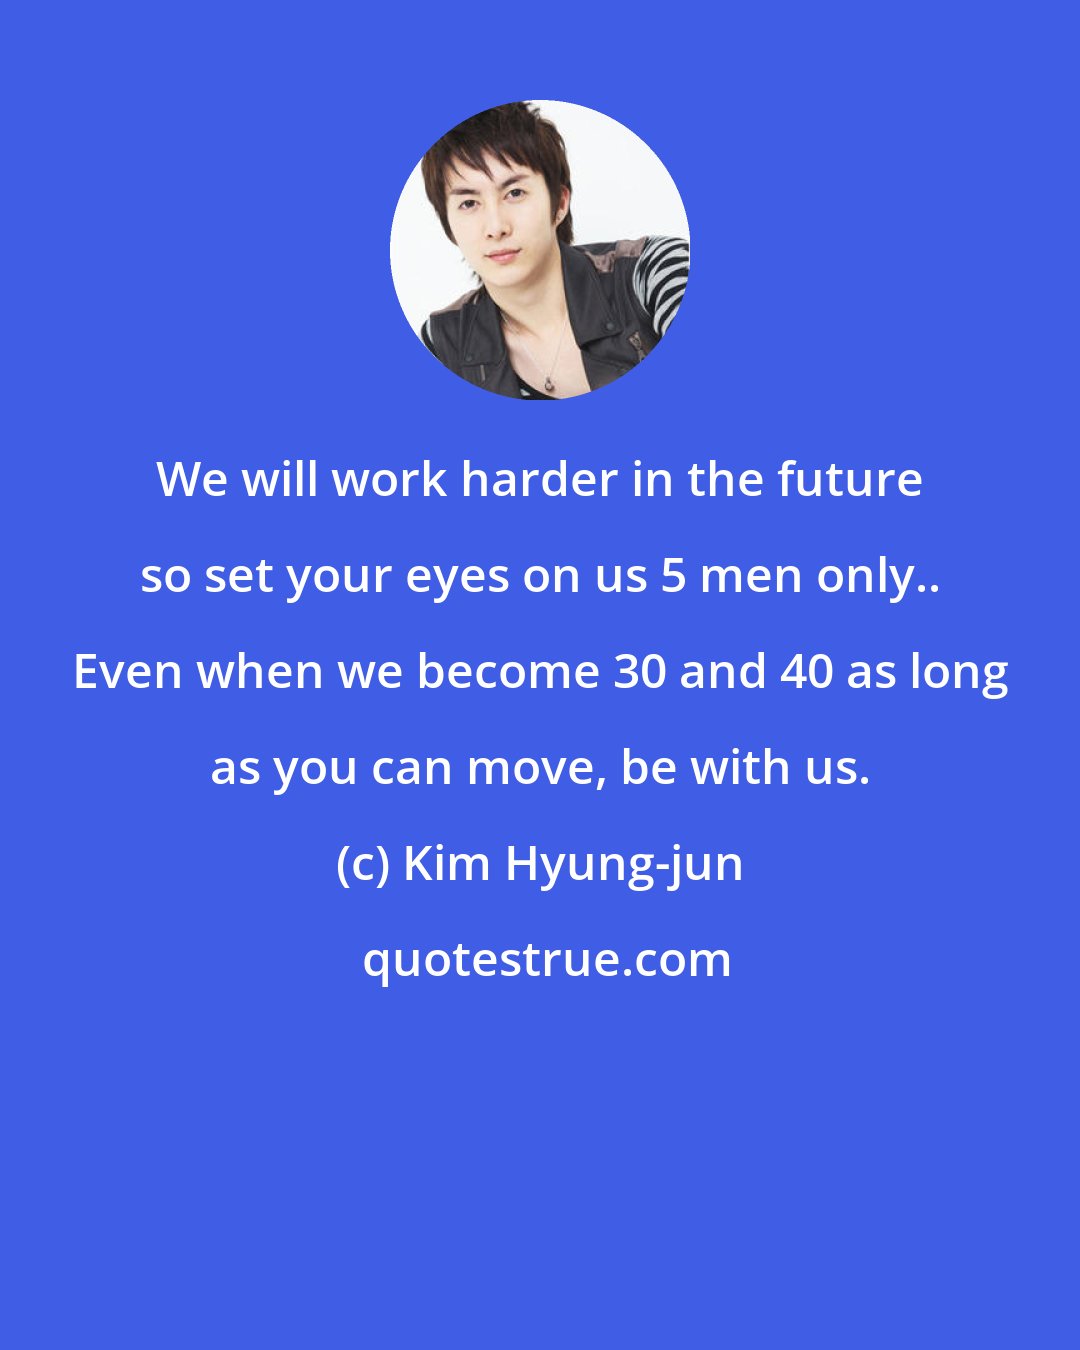 Kim Hyung-jun: We will work harder in the future so set your eyes on us 5 men only.. Even when we become 30 and 40 as long as you can move, be with us.